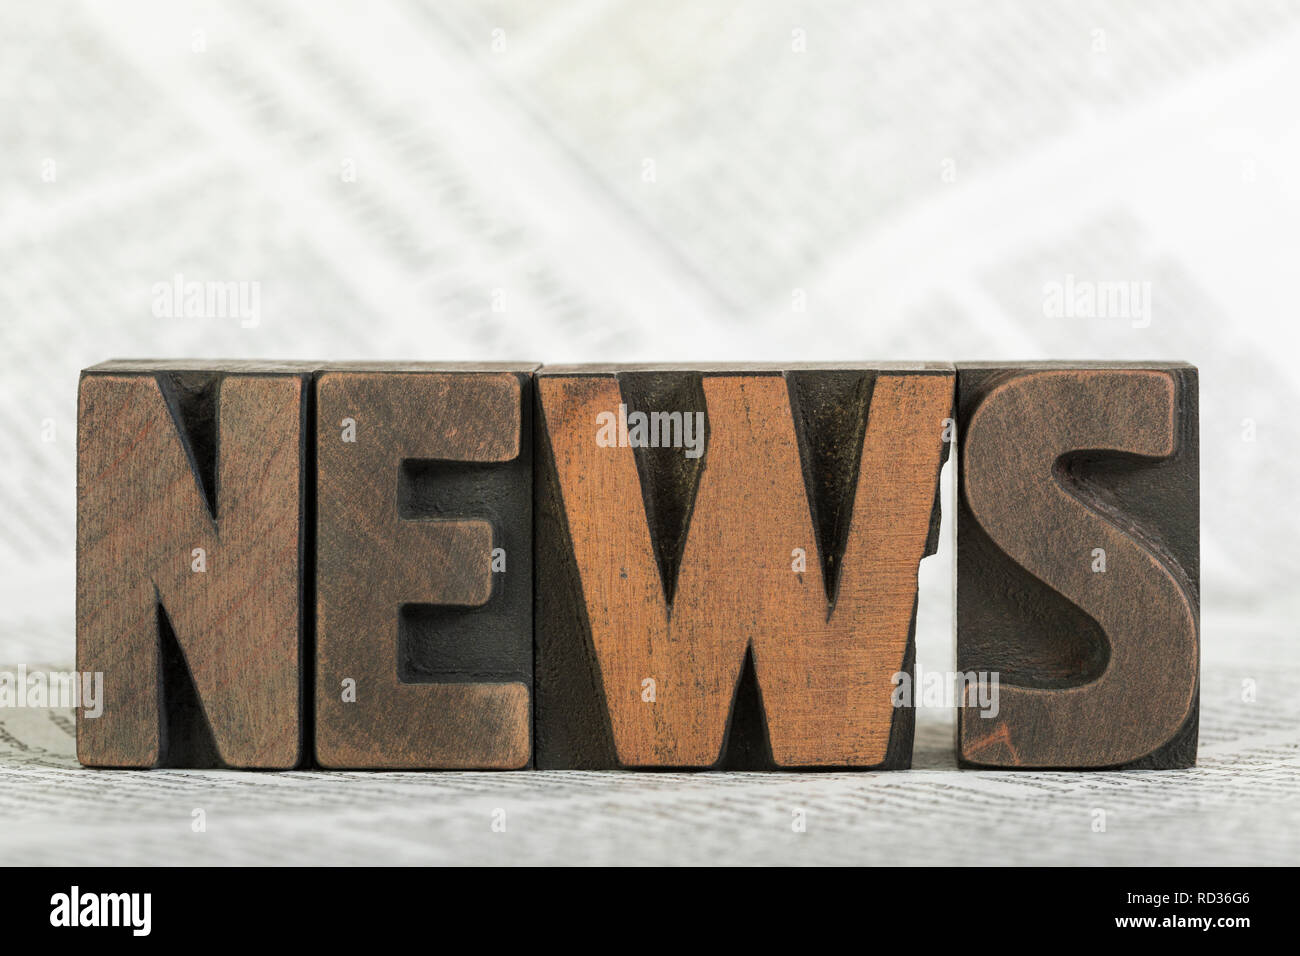 News, word written with vintage wooden letterpress printing blocks on newspaper, shallow depth of field Stock Photo